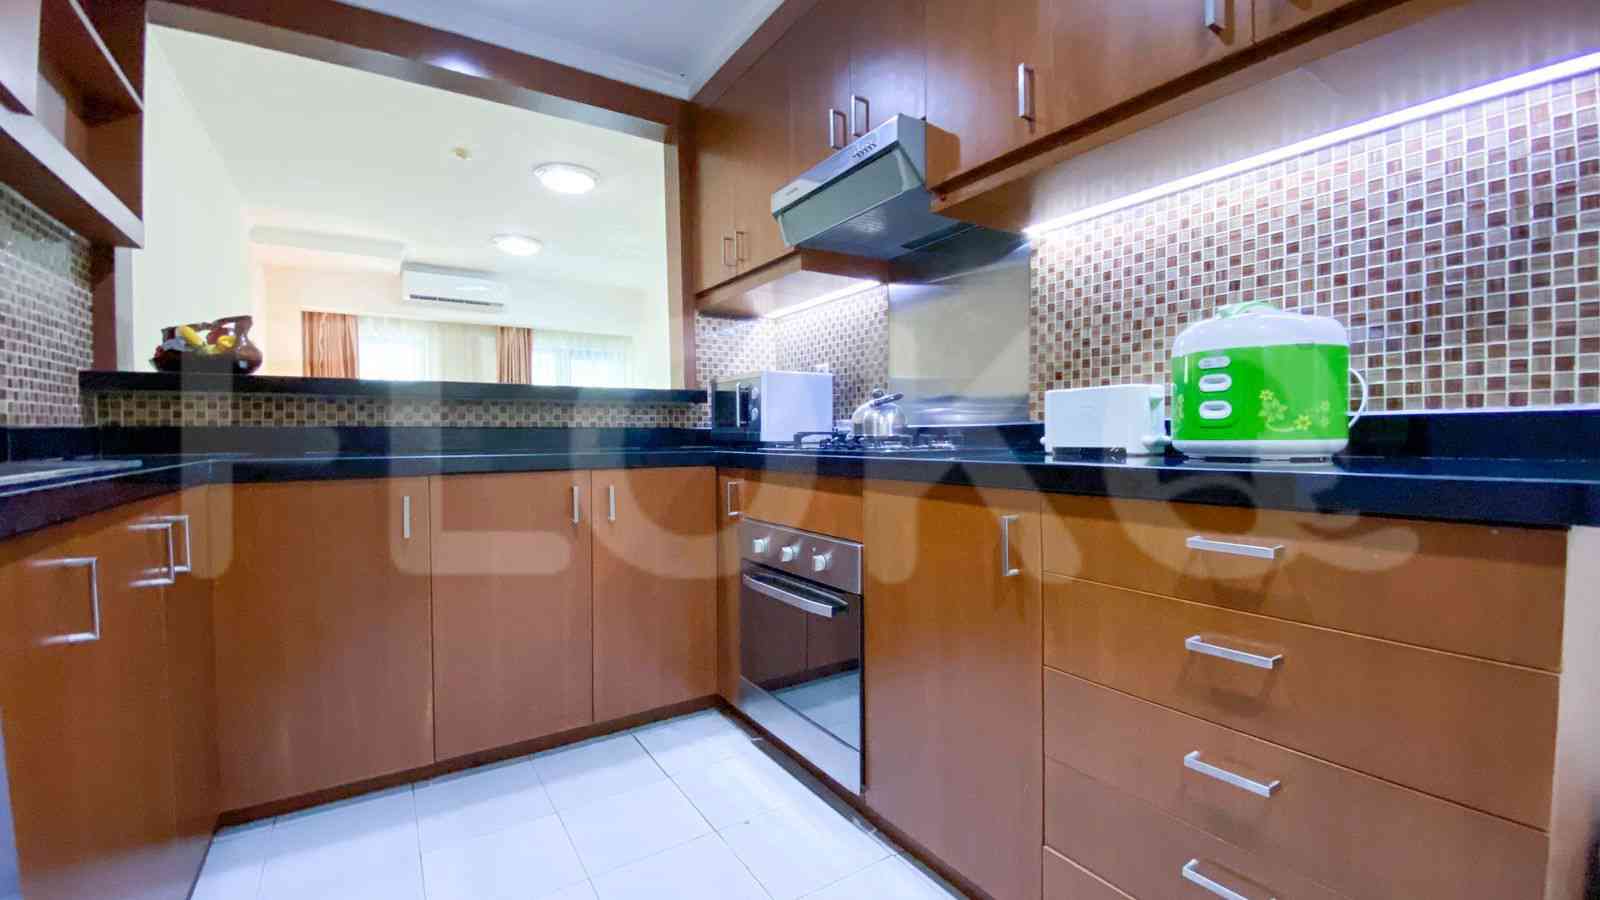 2 Bedroom on 2nd Floor for Rent in Kemang Apartment by Pudjiadi Prestige - fke6bf 9